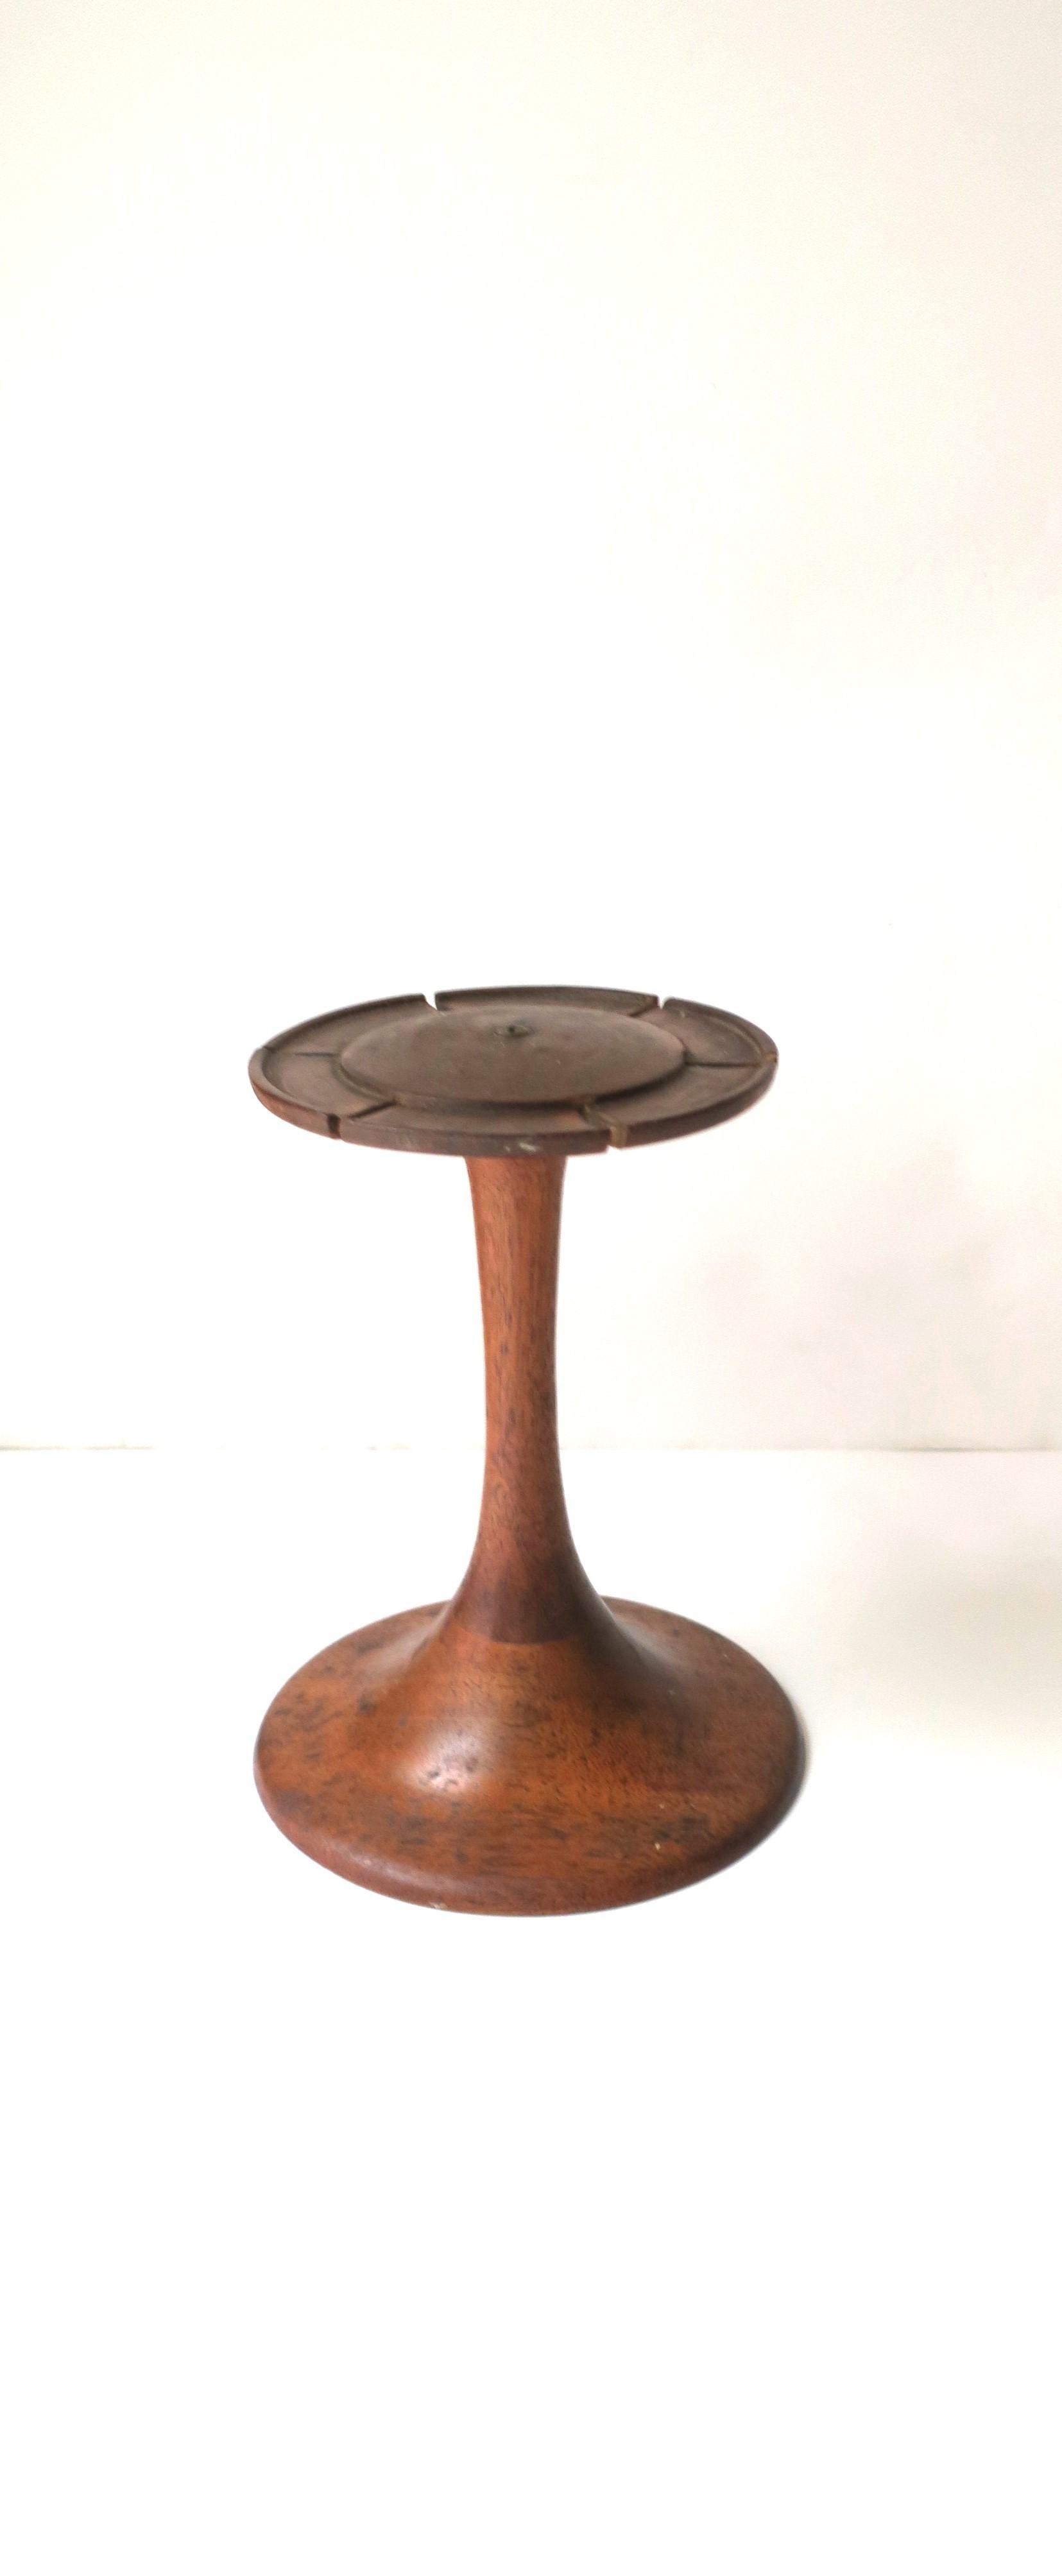 A beautiful and well-made wood hat stand, Midcentury Modern period, circa mid-20th. A great piece for personal use or display. Very good condition as shown in images. Dimensions: 5.88